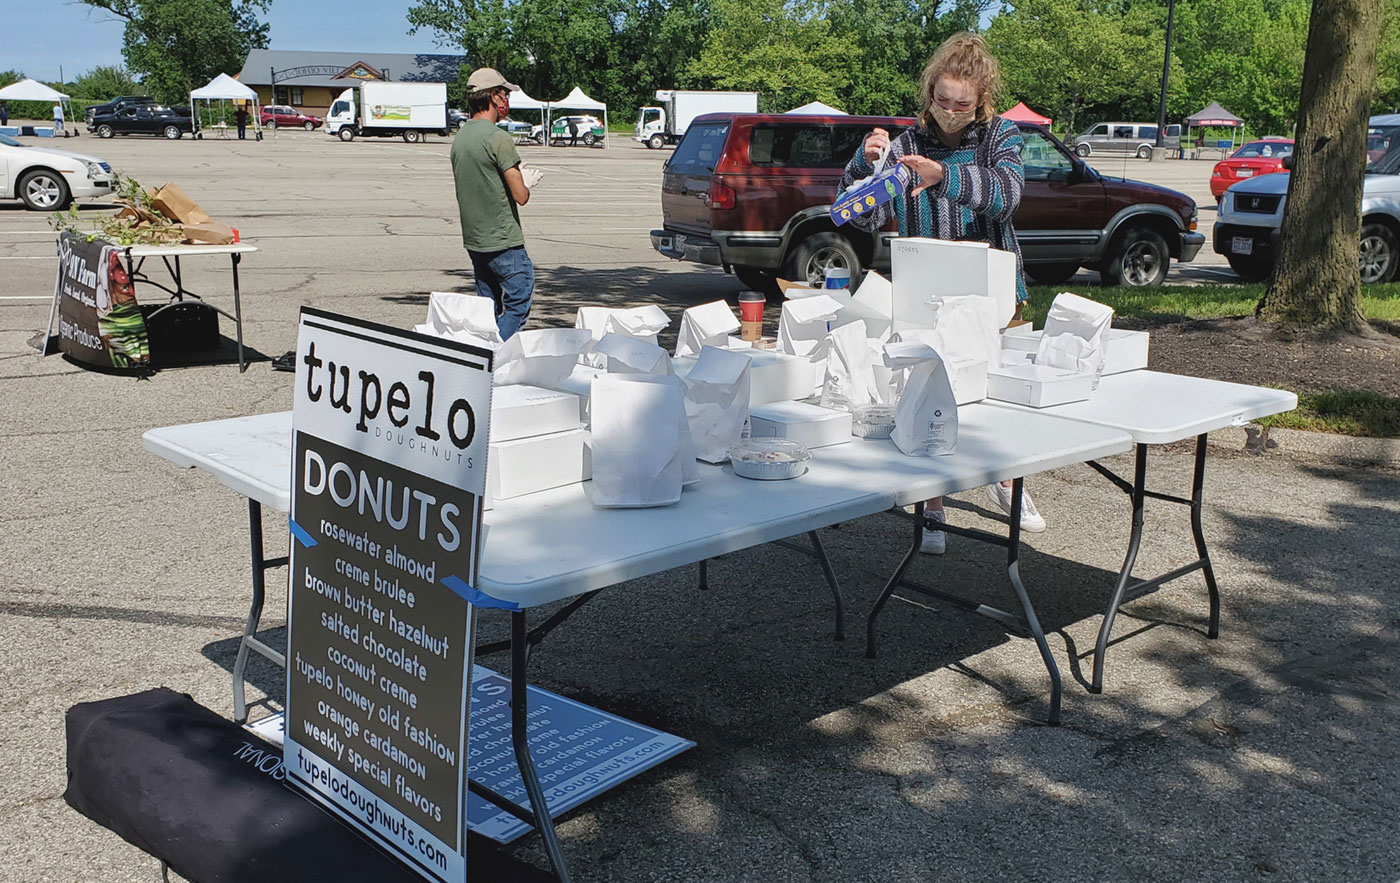 Pre-ordered items are packaged and awaiting pickup at the Clintonville market. Photo by Edible Columbus.